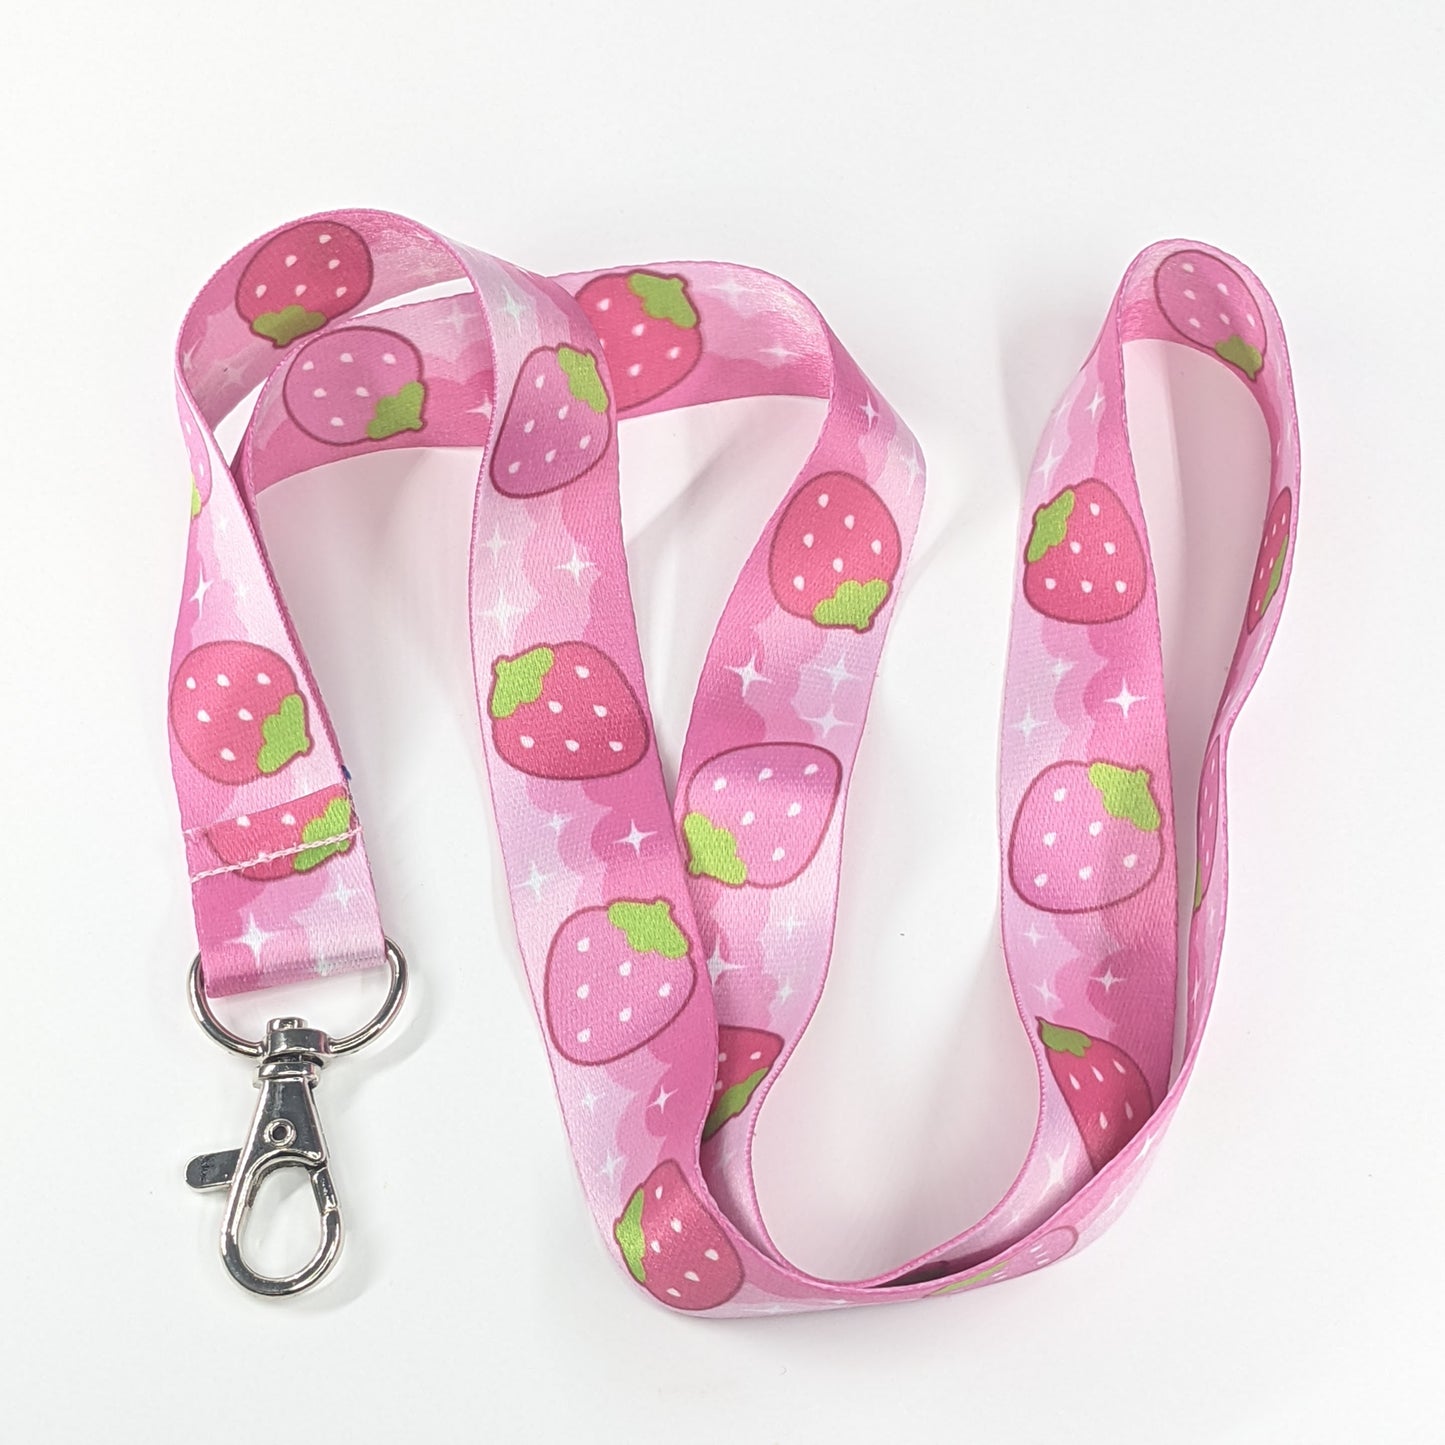 Strawberry Lanyard Kawaii Pink with Silver Lobster Clasp | Cute Lanyard | Cute Key Holder | by Tawny Illustrations